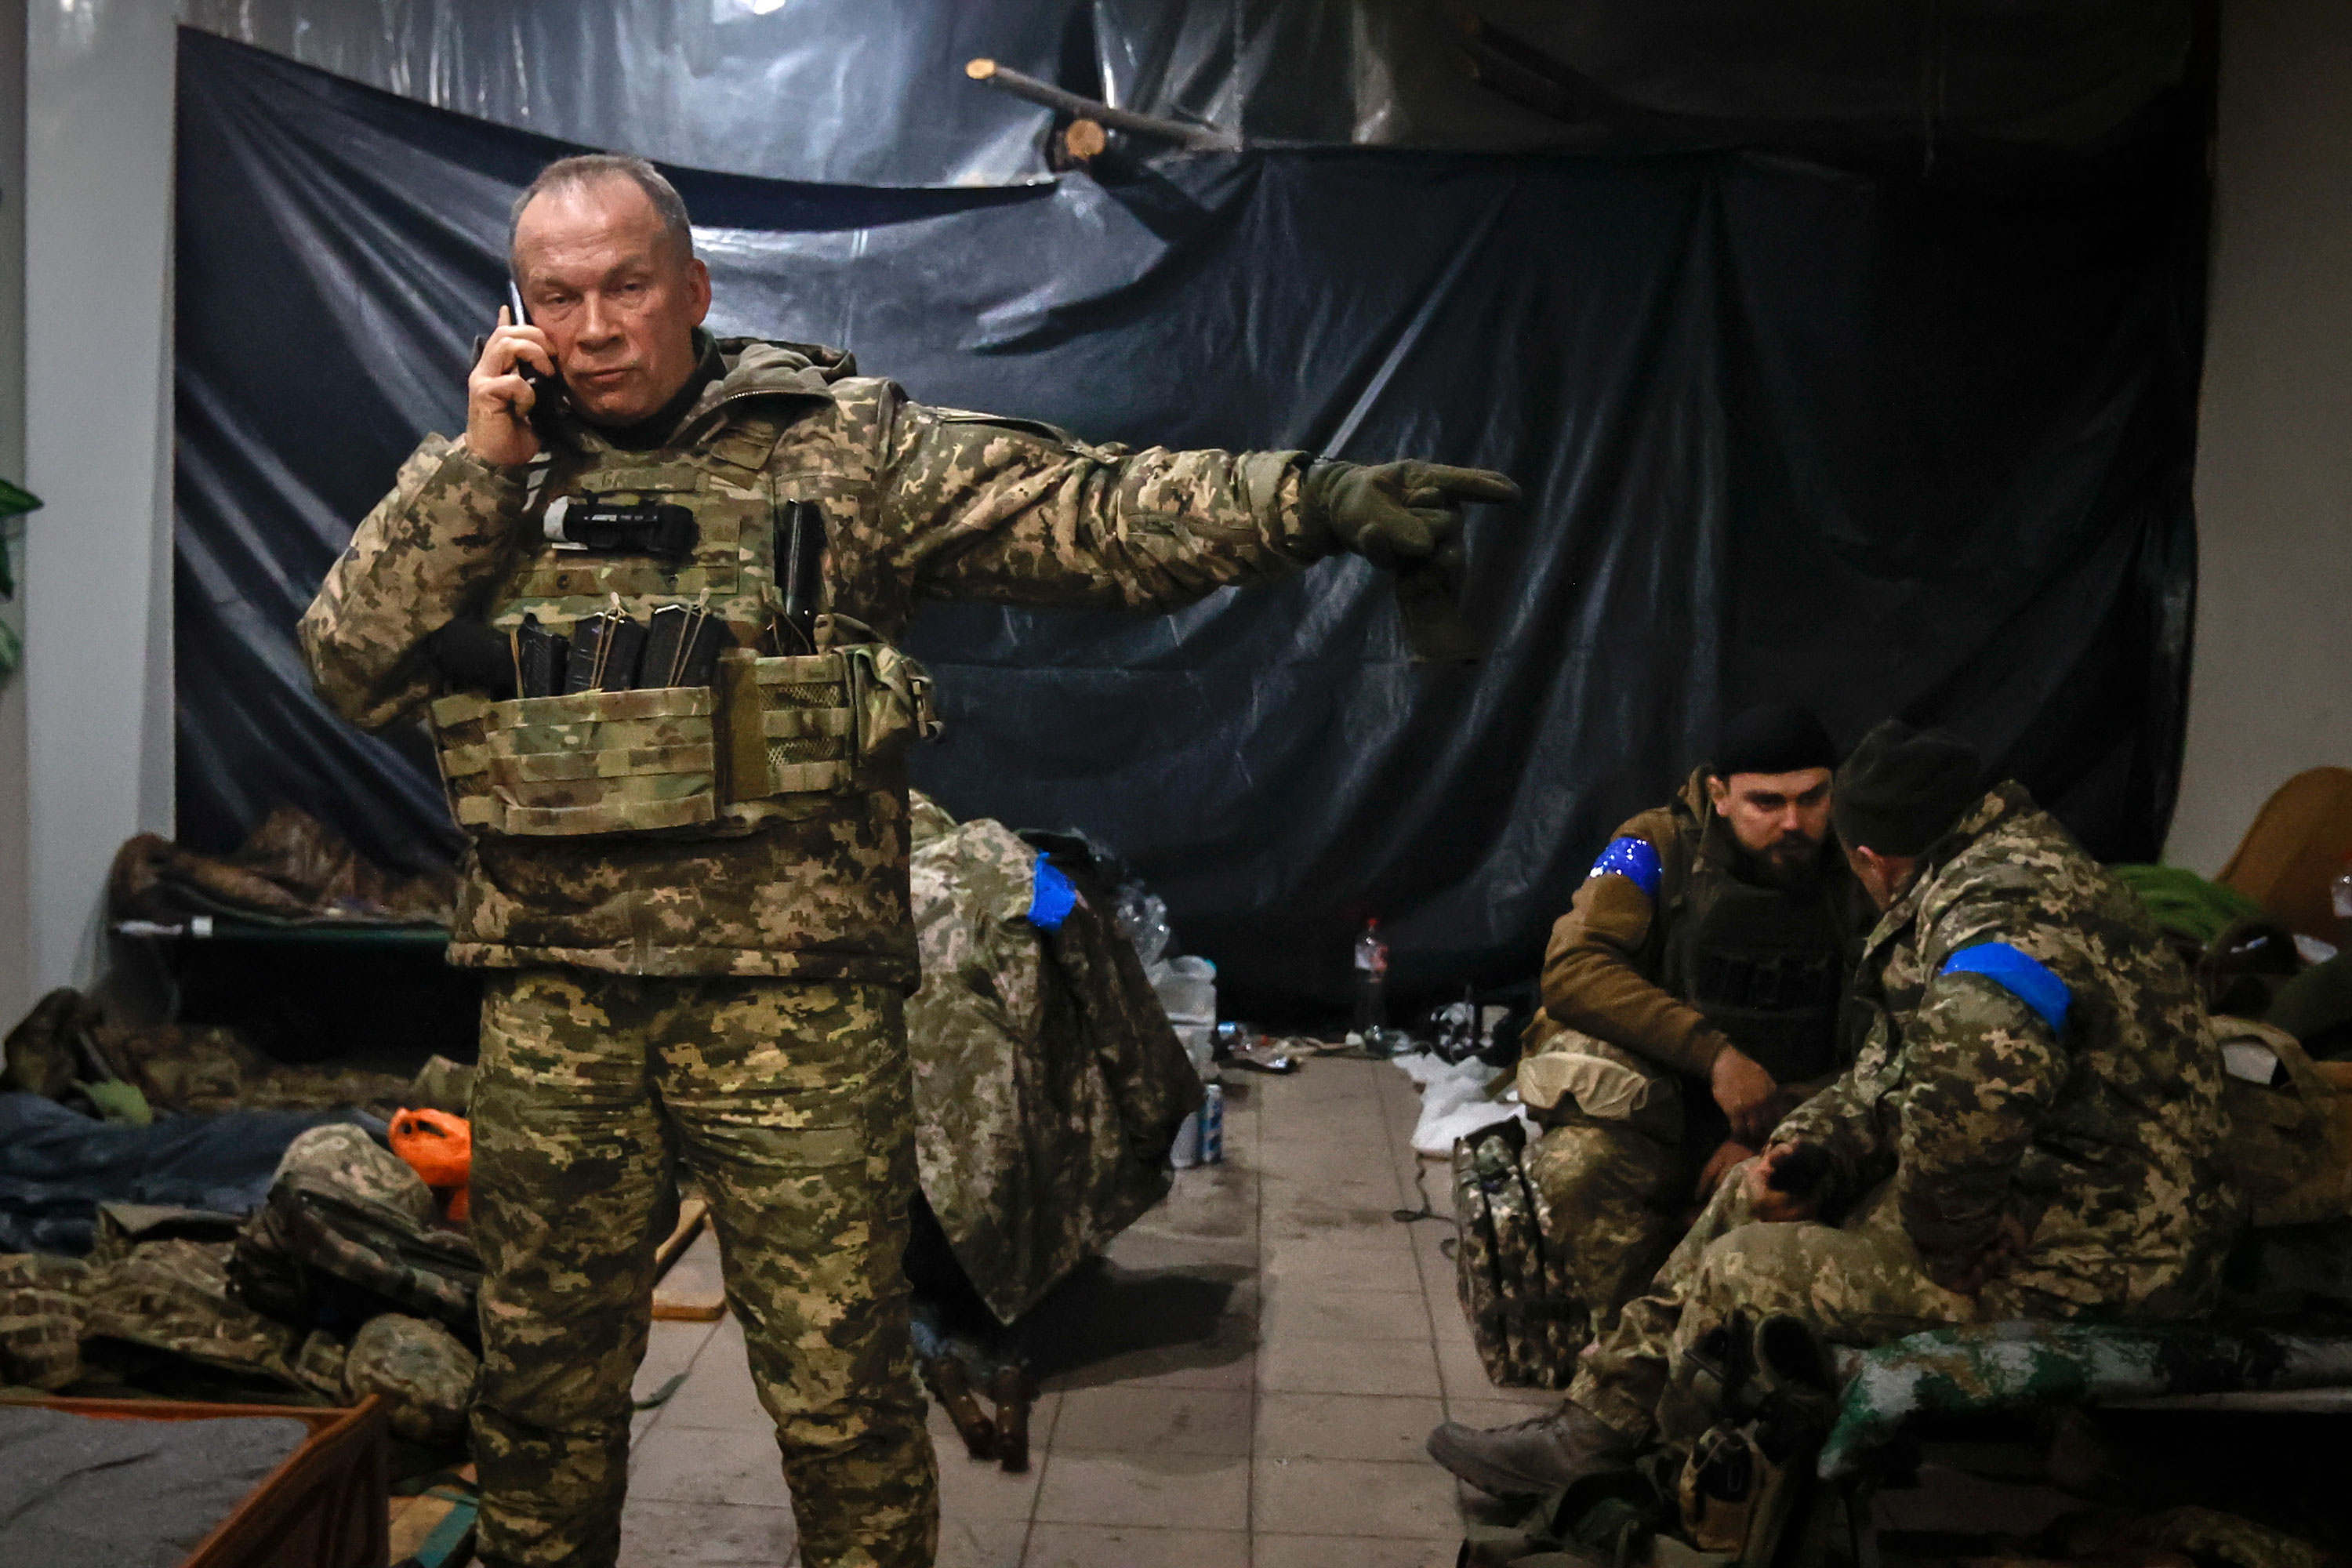 Commander of the Ukrainian army, Colonel General Oleksandr Syrskyi, gives instructions in a shelter in Soledar, the site of heavy battles with the Russian forces, in the Donetsk region, Ukraine on January 8, 2023.